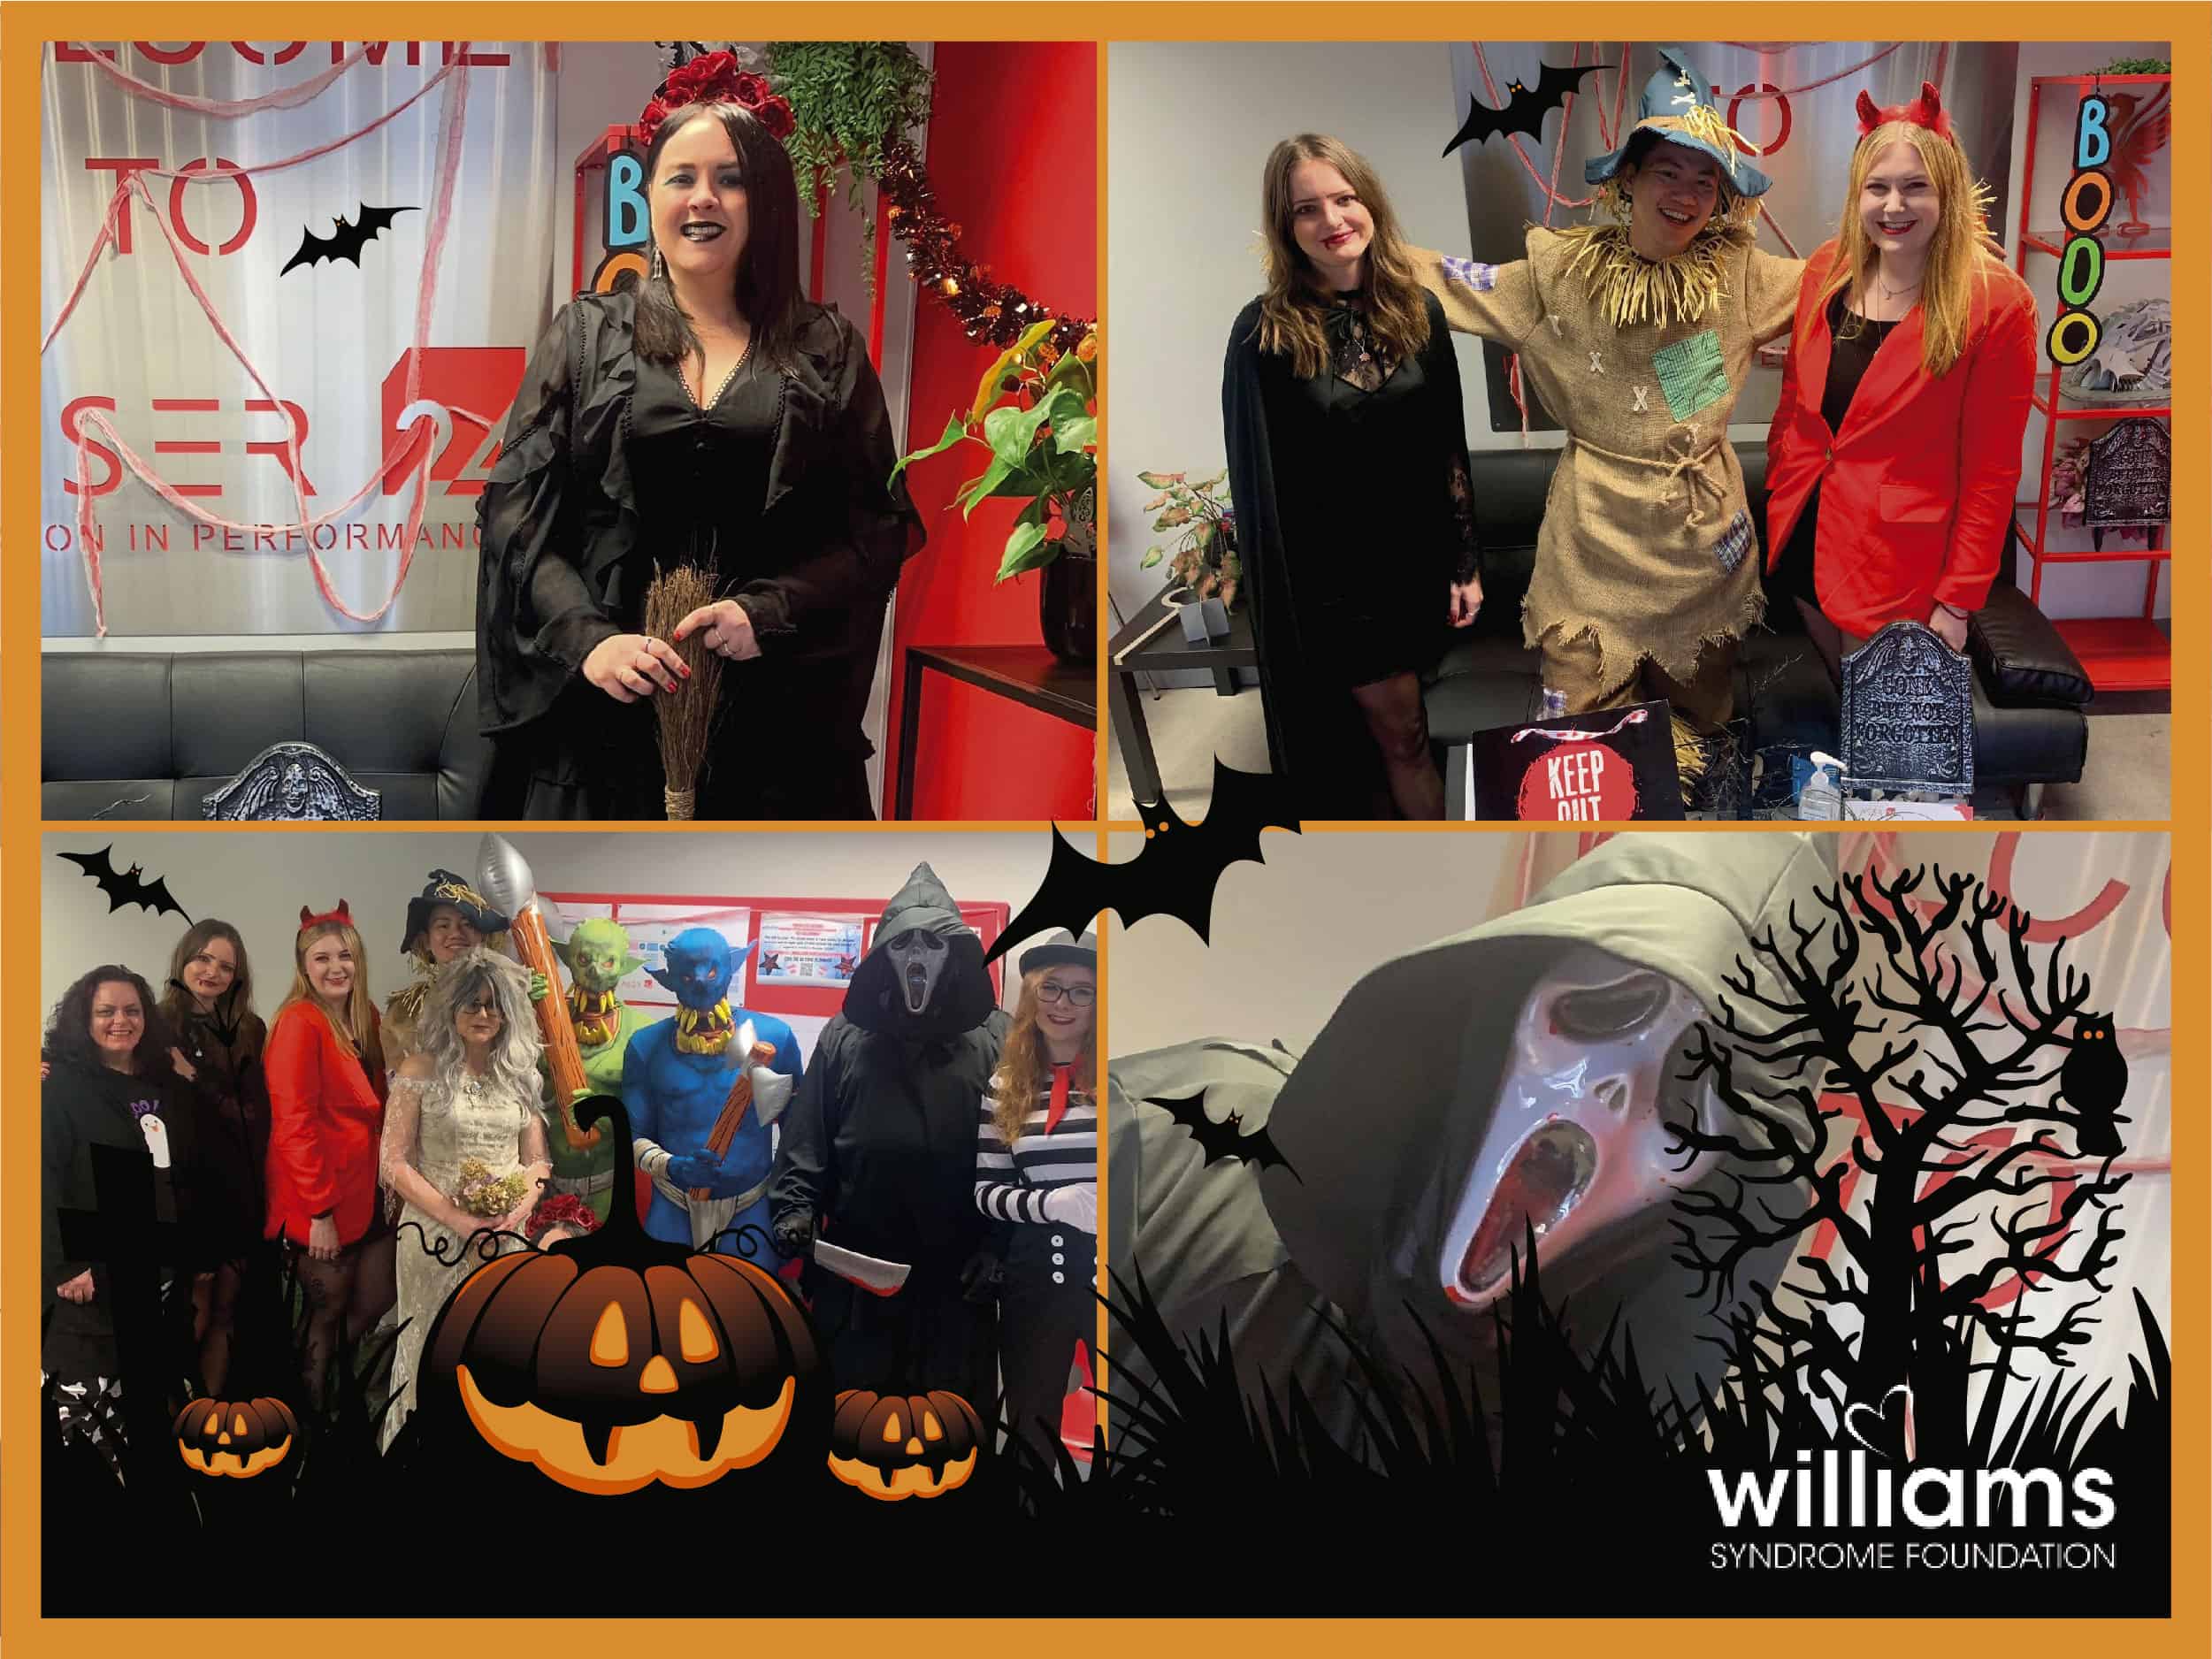 Laser 24 were in Spooktacular spirits with plenty of terrifying outfits, raising awareness and funds for the Williams Syndrome Foundation